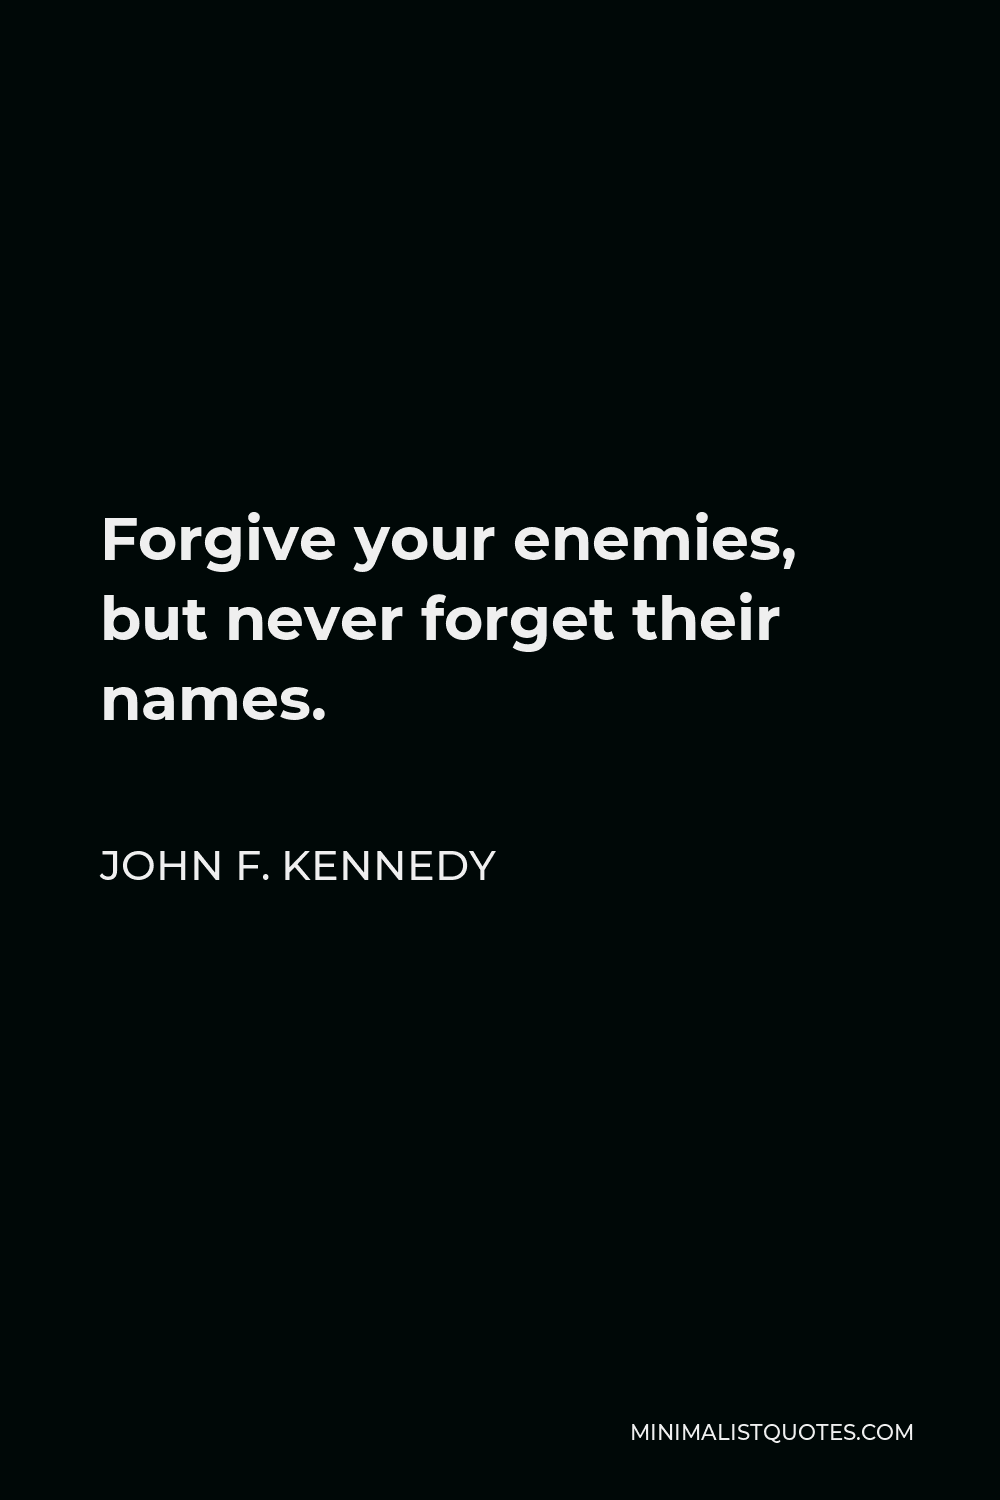 John F. Kennedy Quote - Forgive your enemies, but never forget their names.